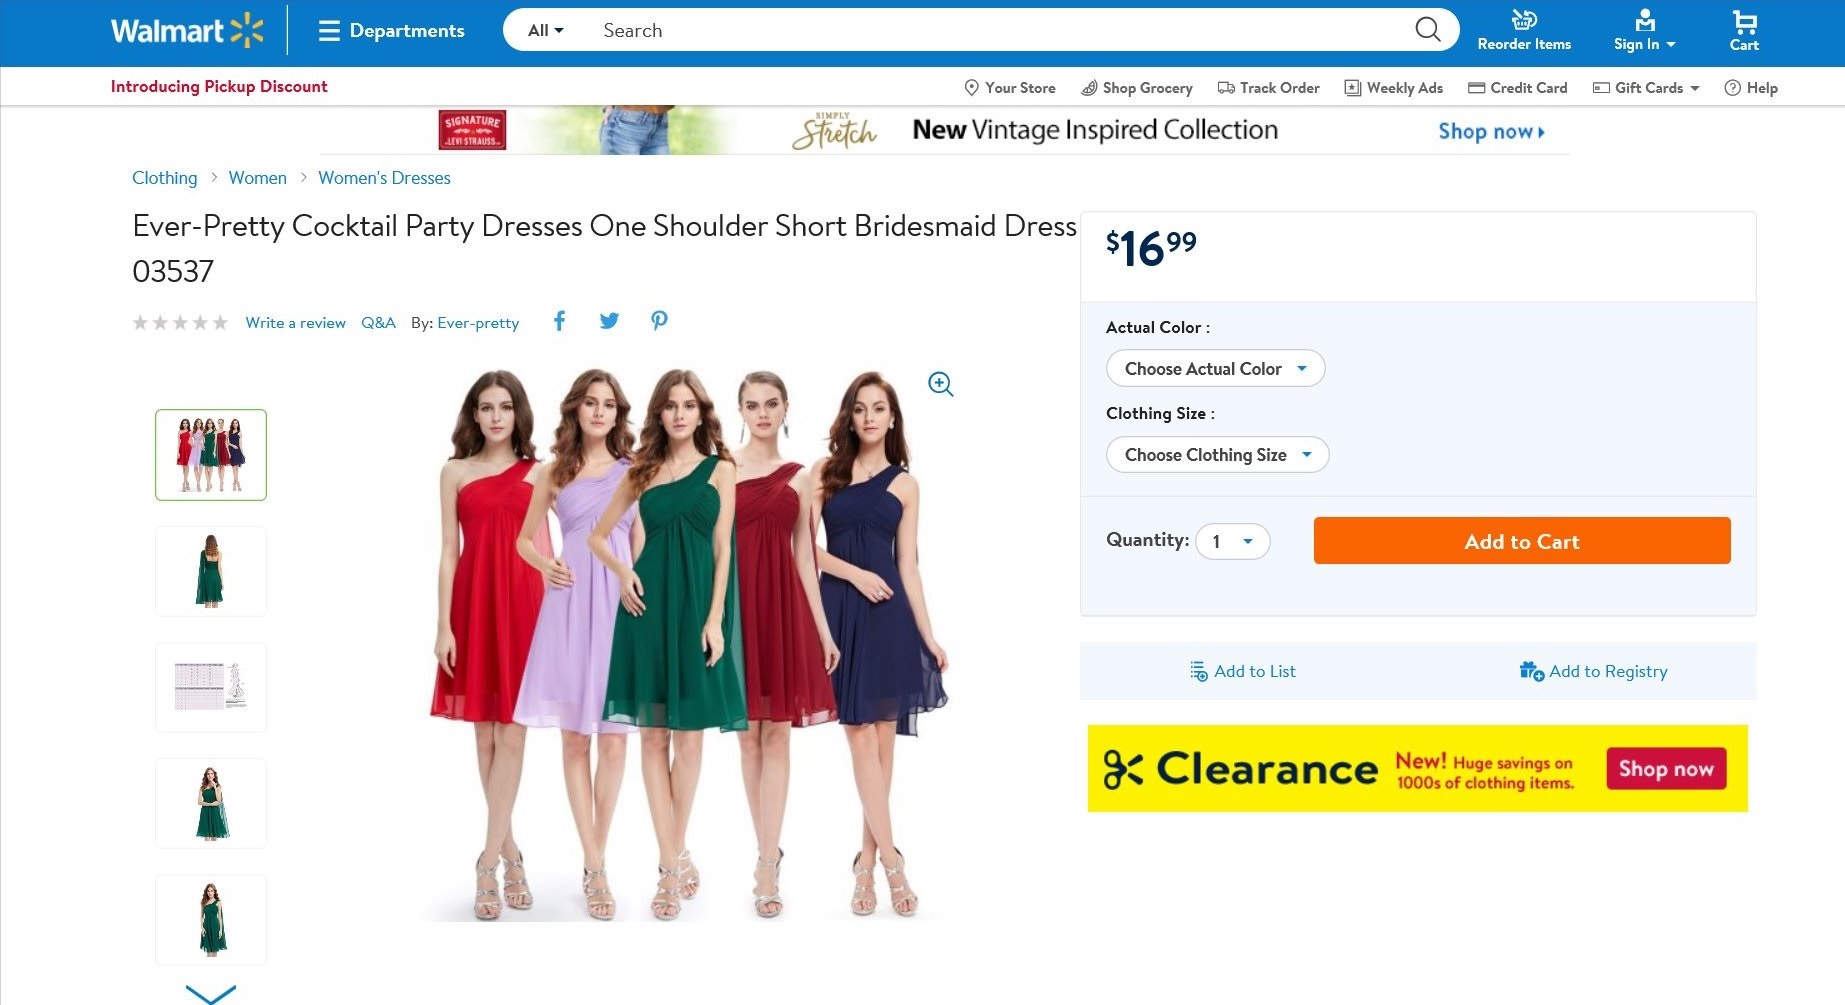 How to upload products to Walmart.com in bulk